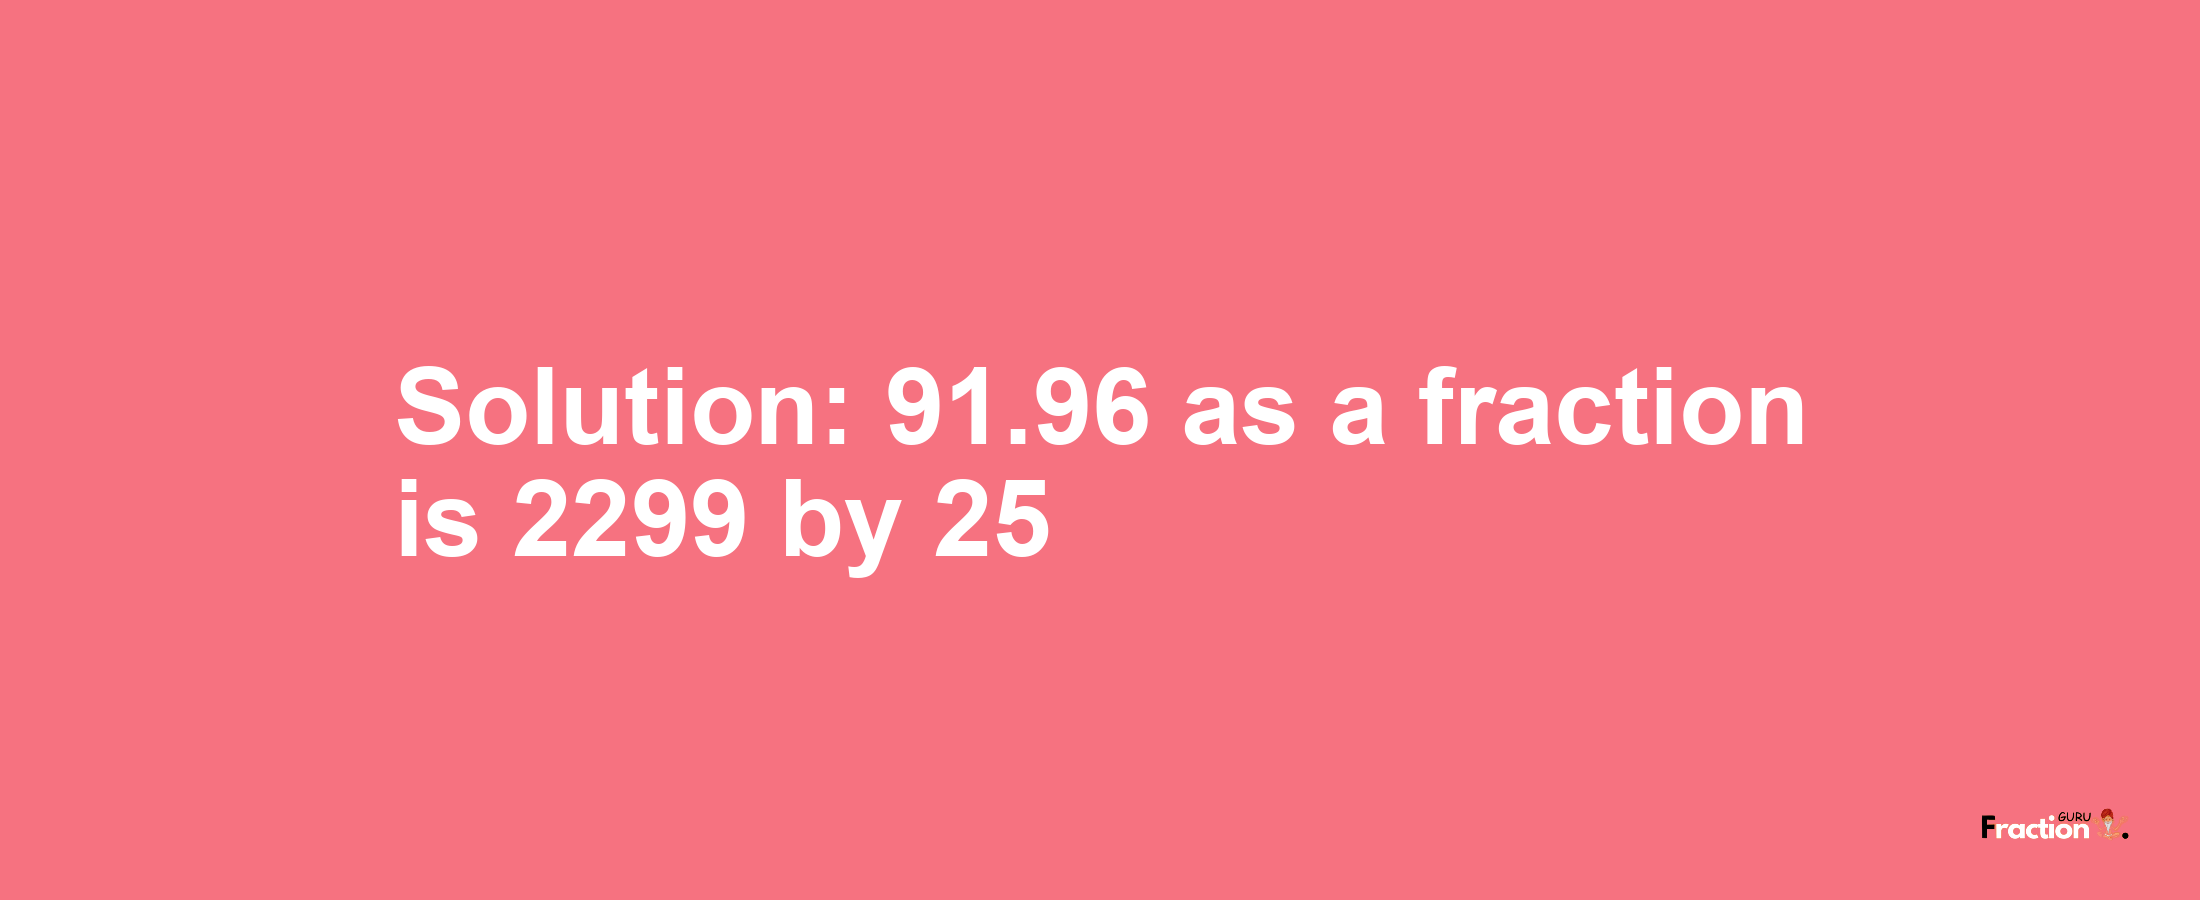 Solution:91.96 as a fraction is 2299/25